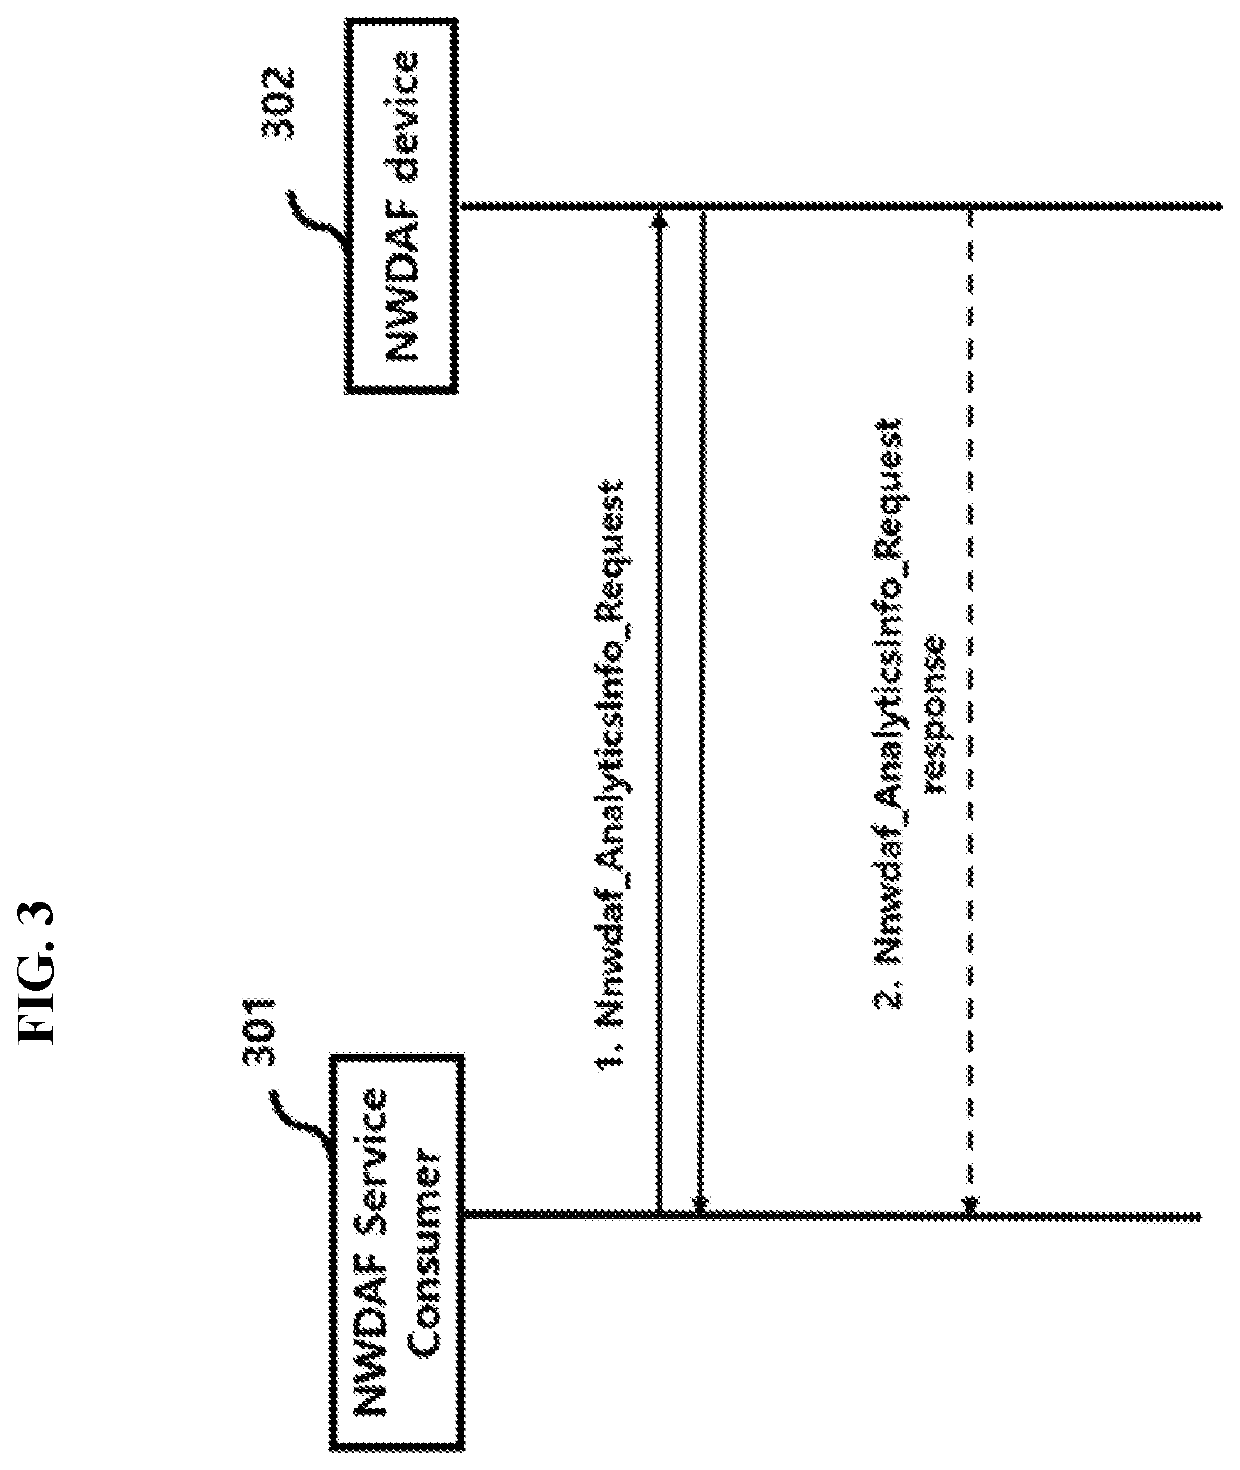 Method and system for providing communication analysis of user equipment based on network data analysis